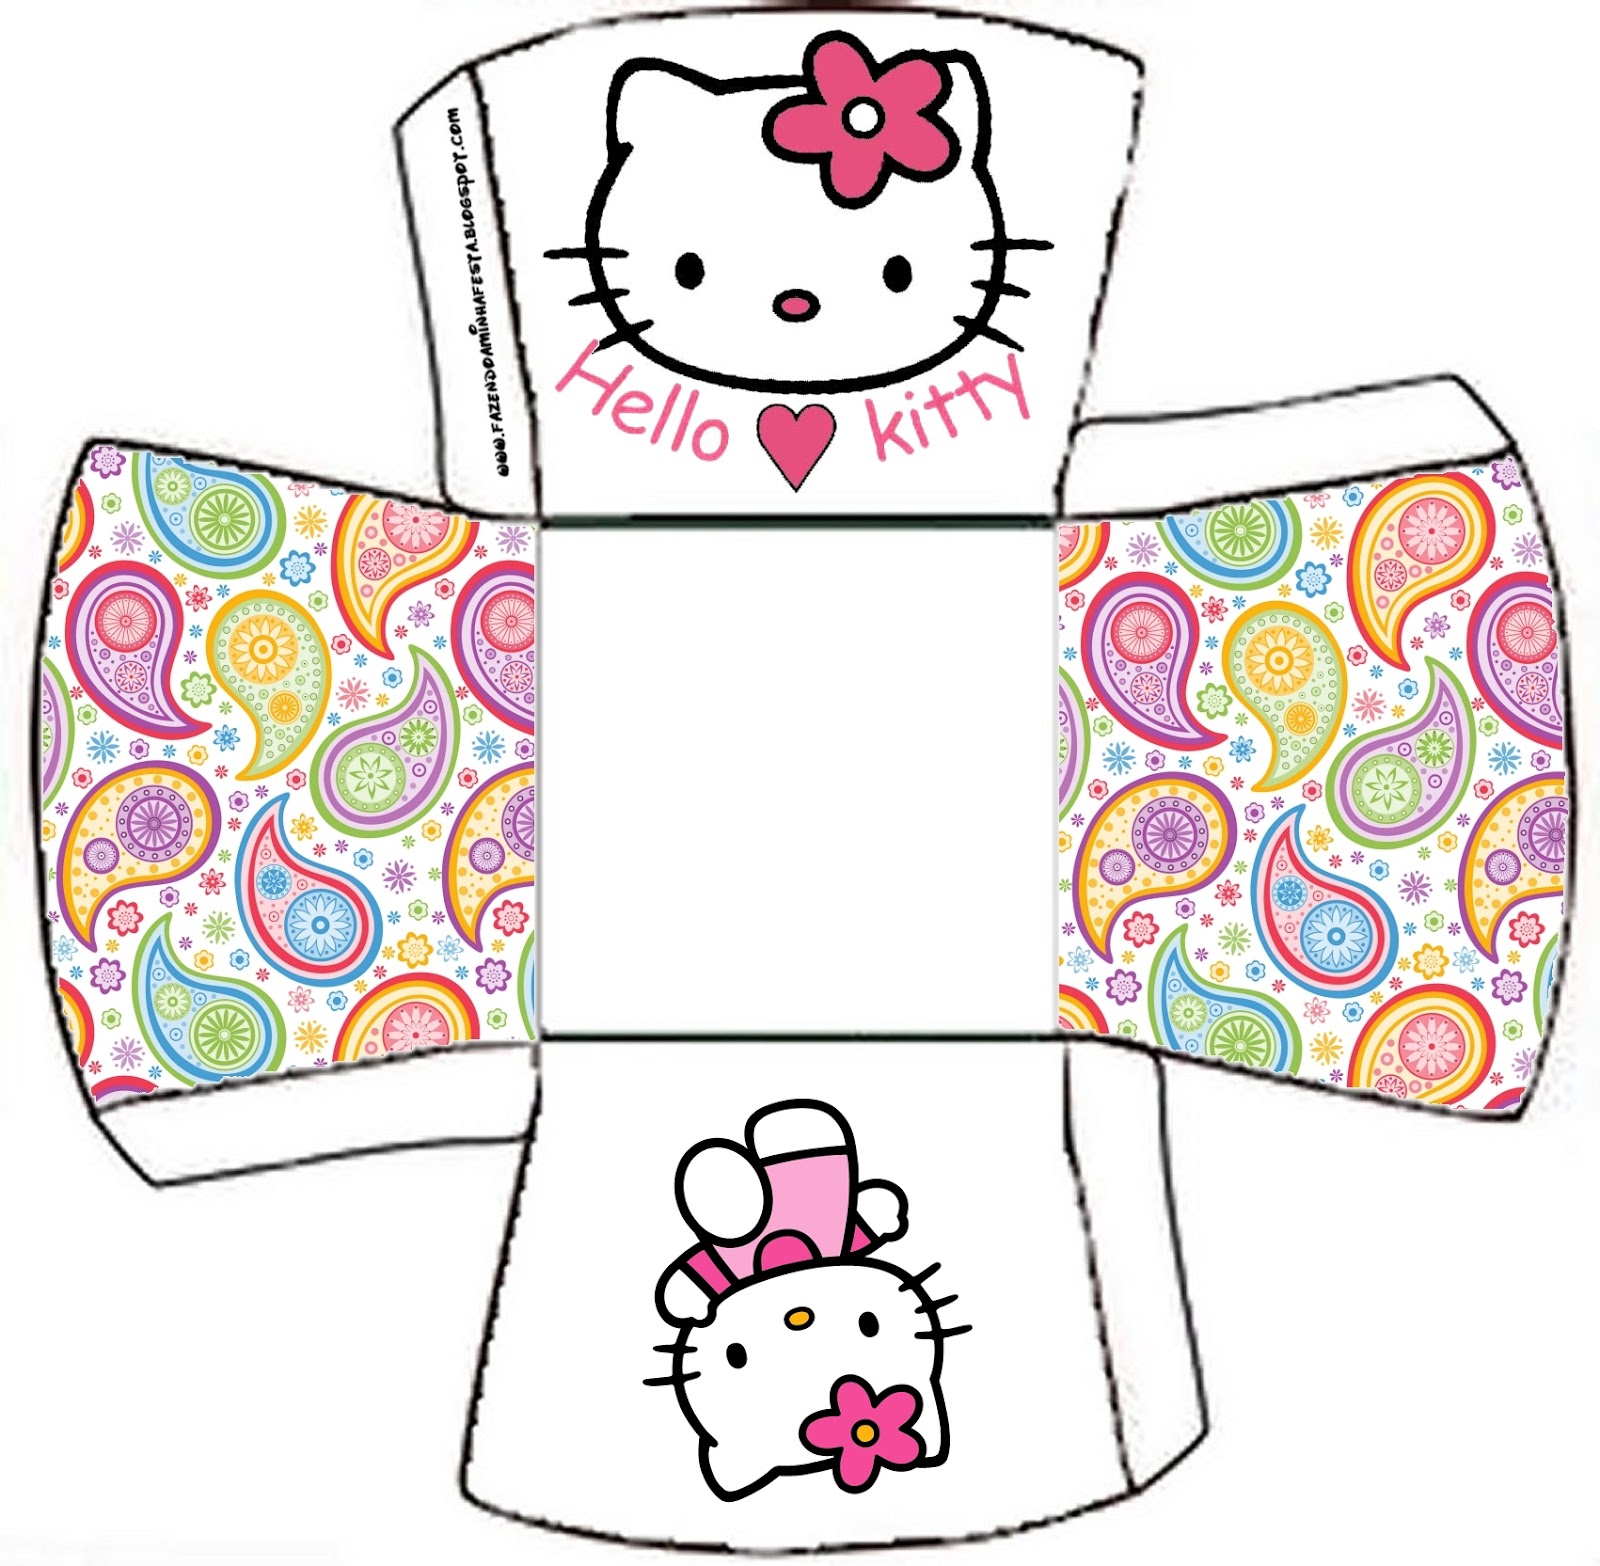 hello-kitty-party-free-printable-boxes-oh-my-fiesta-in-english